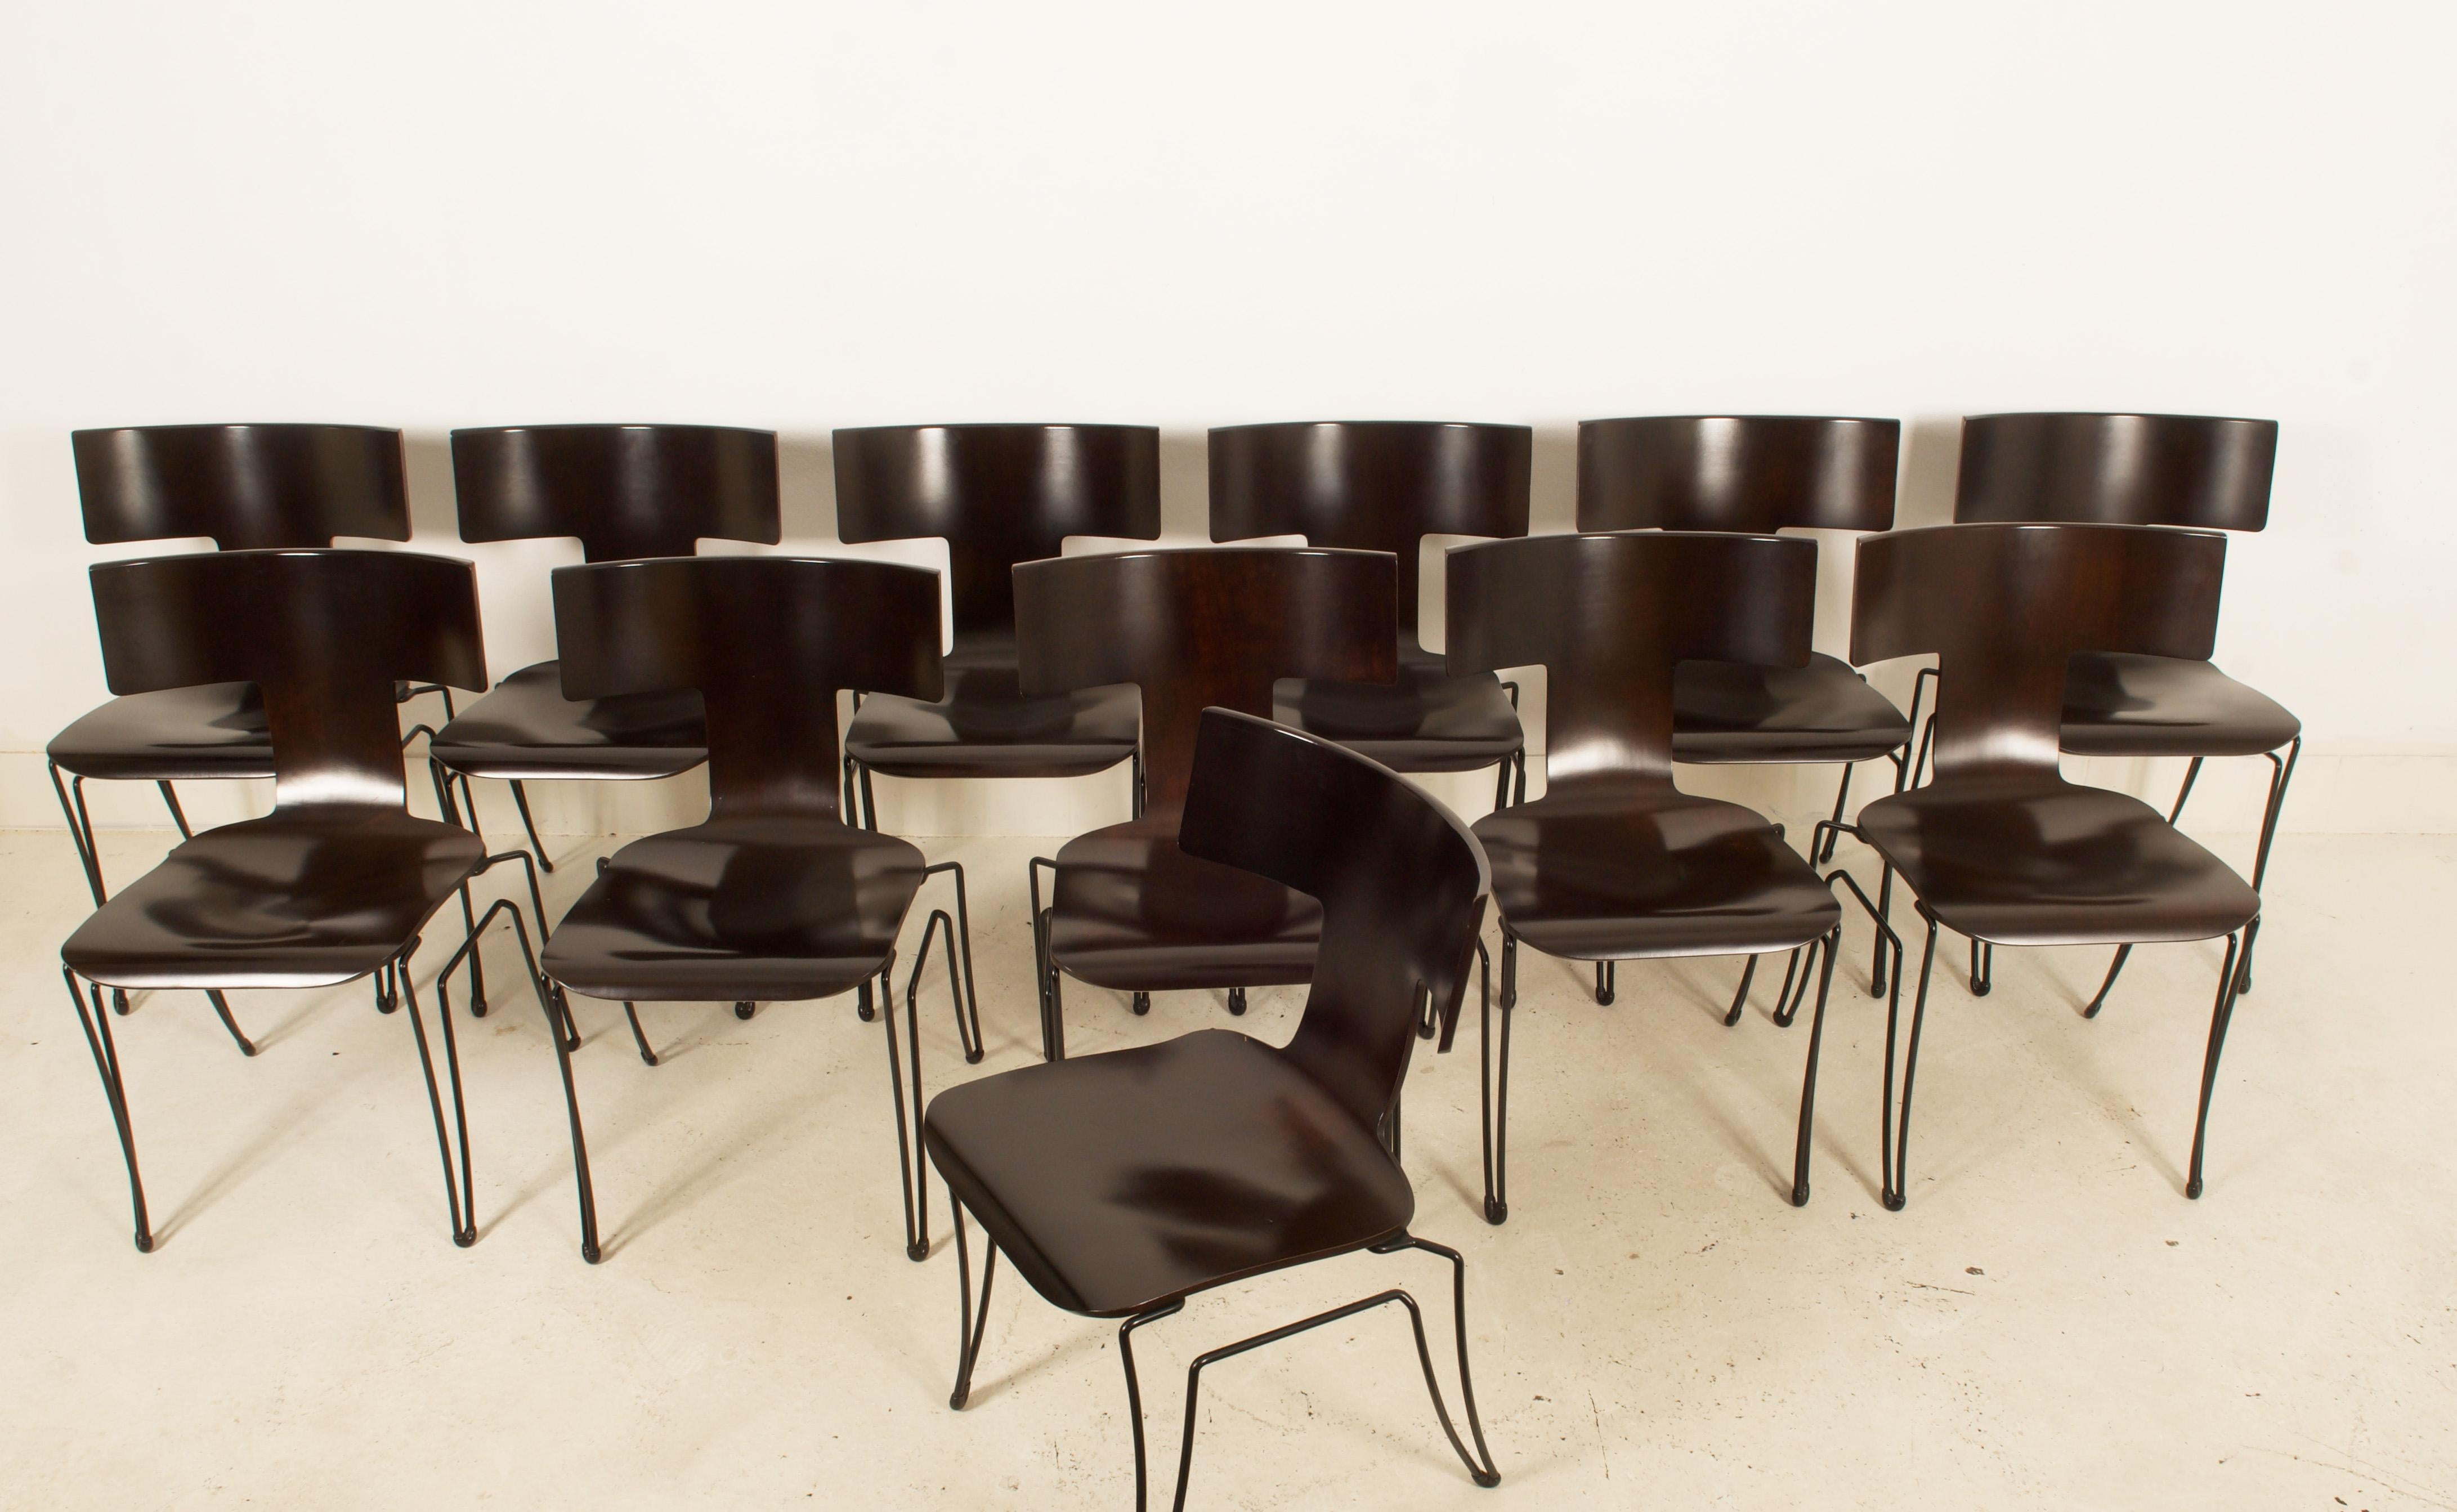 Steel Set of 12 Anziano Dining Chairs by John Hutton for Donghia For Sale